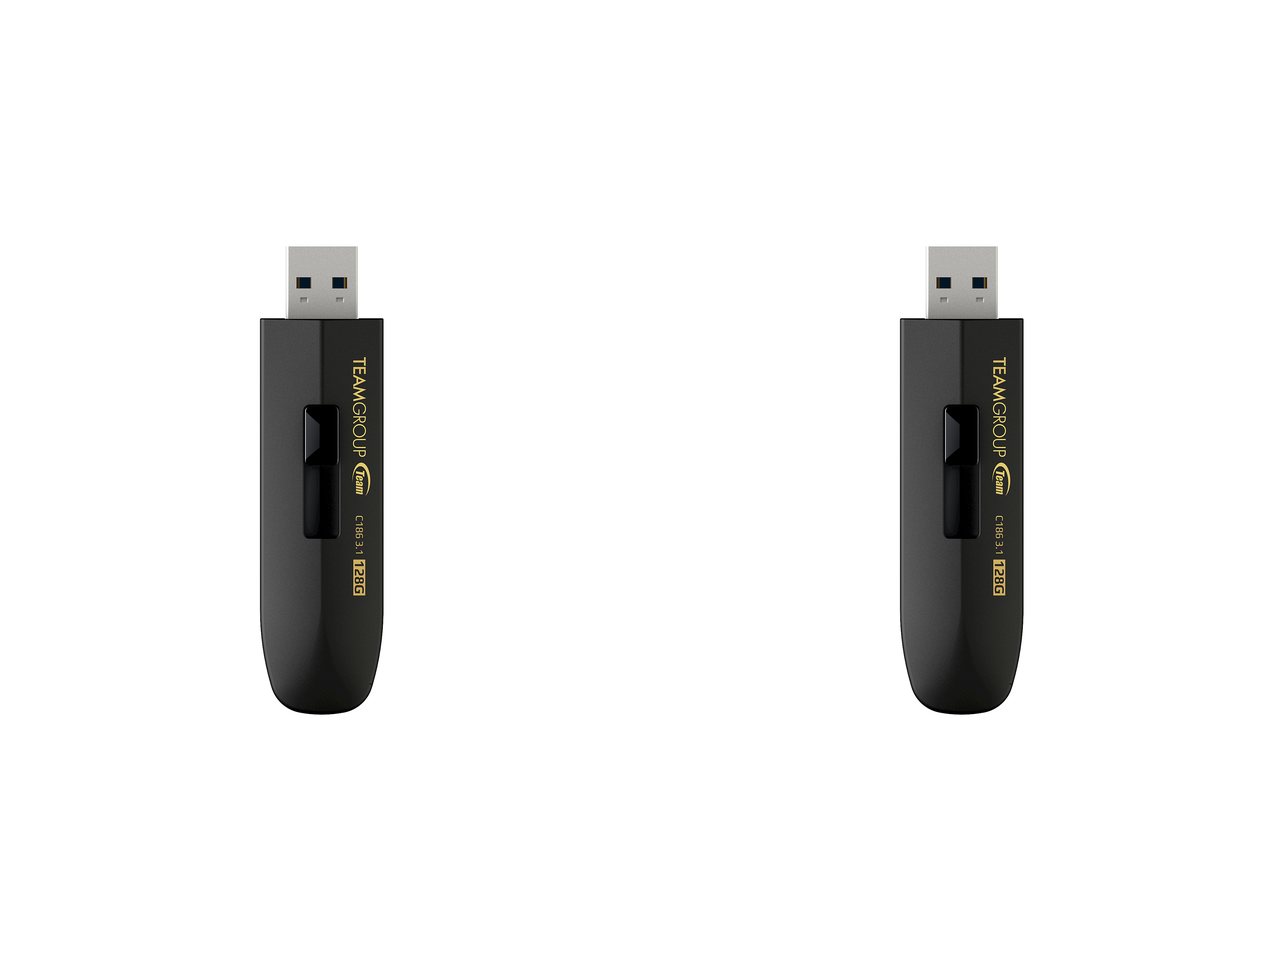 2-count 128GB Team Group C186 USB 3.1 Flash Drive $15 + Free Shipping